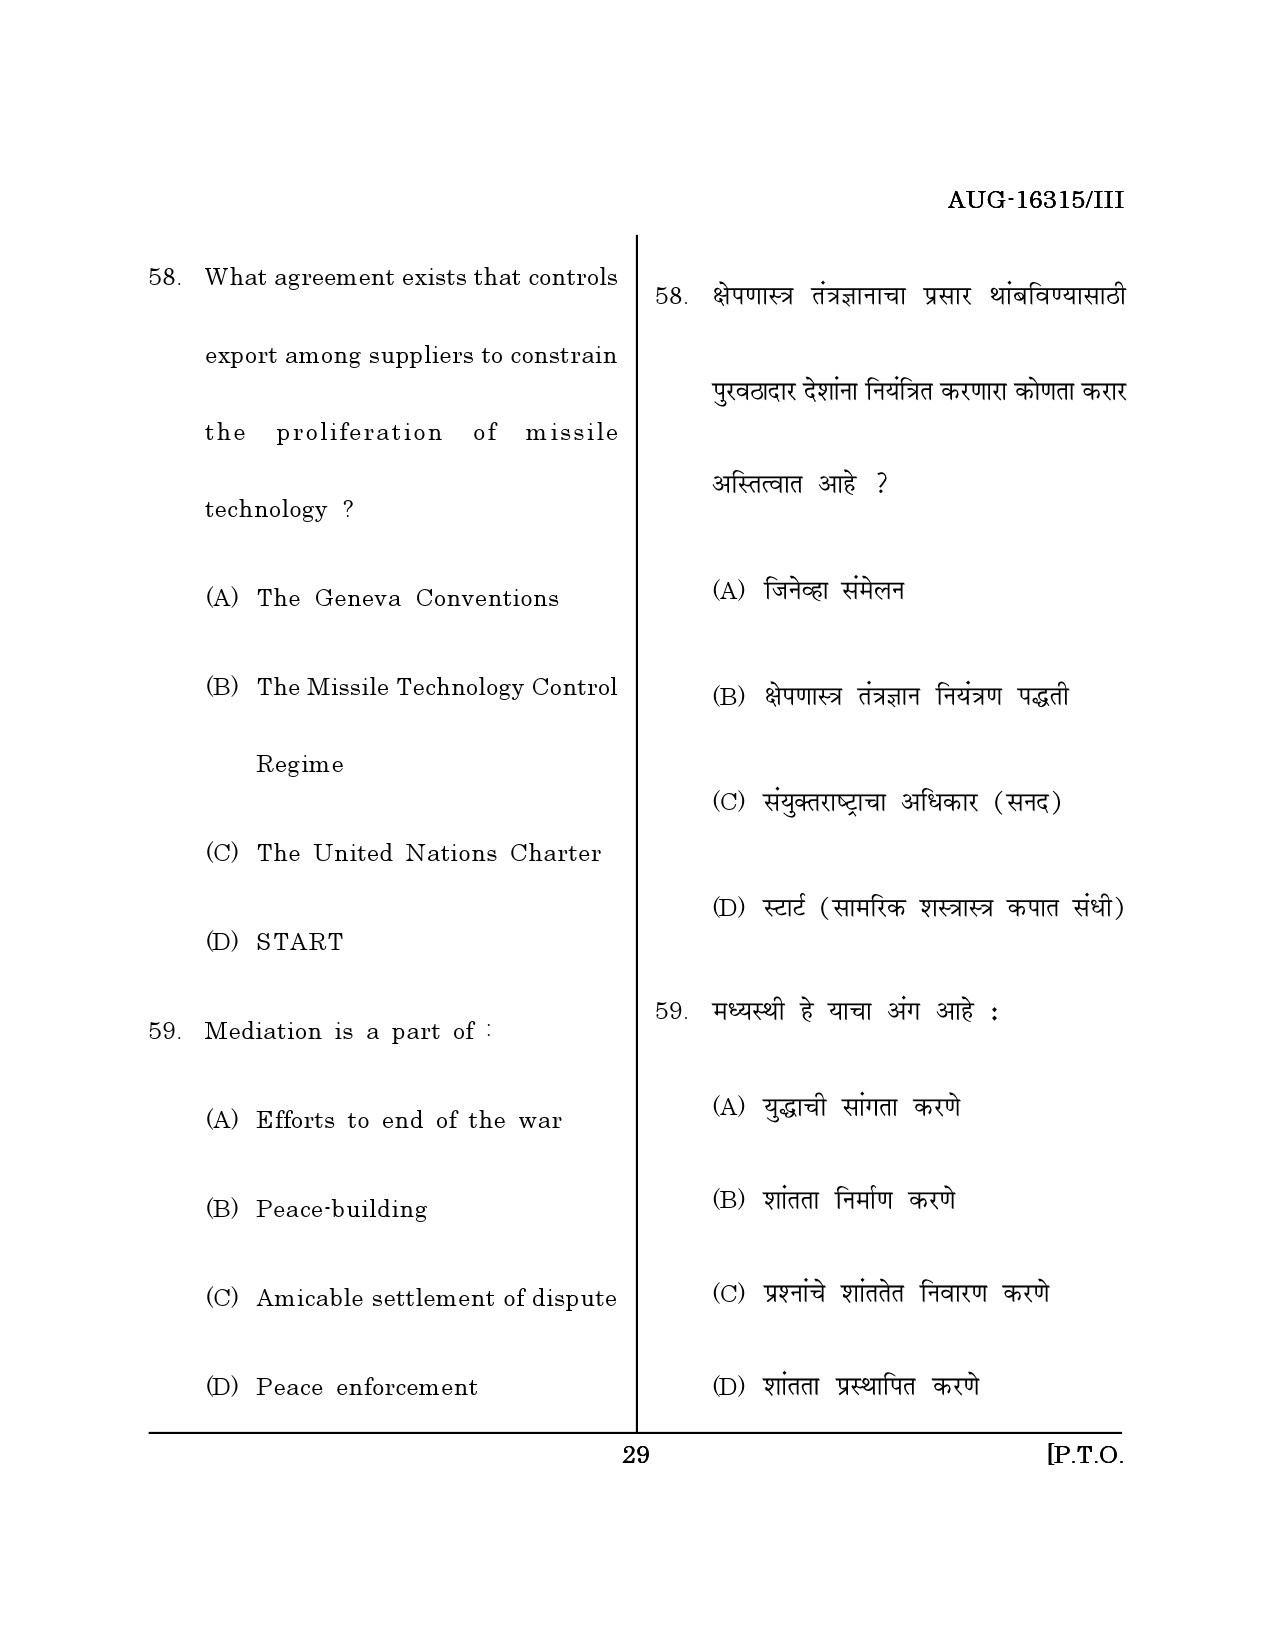 Maharashtra SET Defence and Strategic Studies Question Paper III August 2015 28